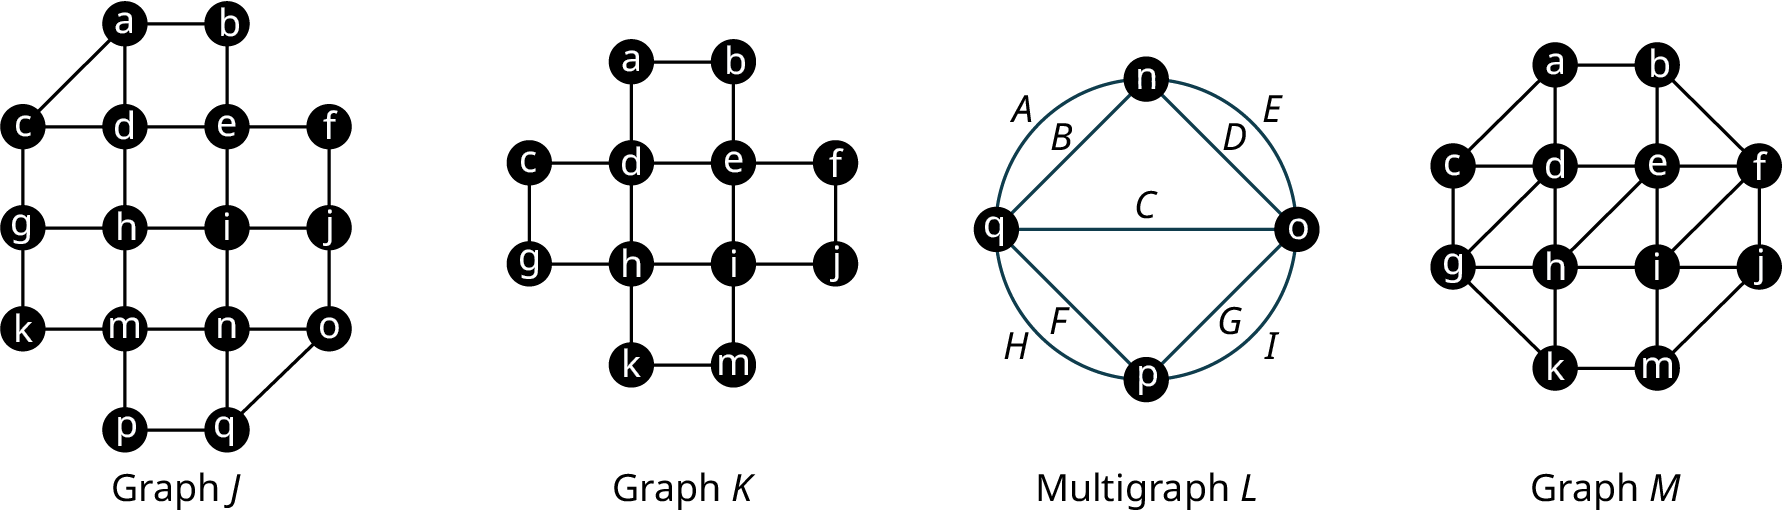 Four graphs. Graph J has 16 vertices. The edges are a b, a c, a d, b e, c d, d e, e f, c g, d h, e i, f j, g h, h i, i j, g k, h m, i n, j o, k m, m n, n o, m p, n q, o q, and p q. Graph K has 12 vertices. The edges are a b, a d, b e, c d, d e, e f, c, d h, e i, f j, g h, h i, i j, h k, i m, and k m. Multigraph L has four vertices. The straight edges are labeled as follows: n q, B; no, D; q p, F; o p, G; q c, C. The curved edges are labeled as follows: q n, A; n o, E; o p, I; p q, H. Graph M has 12 vertices. The edges are labeled a b, a c, a d, b e, b f, c d, d e, e f, c g, g d, d h, h e, e i, i f, f j, g h, h i, i j, g k, h k, i m, j m, and k m.